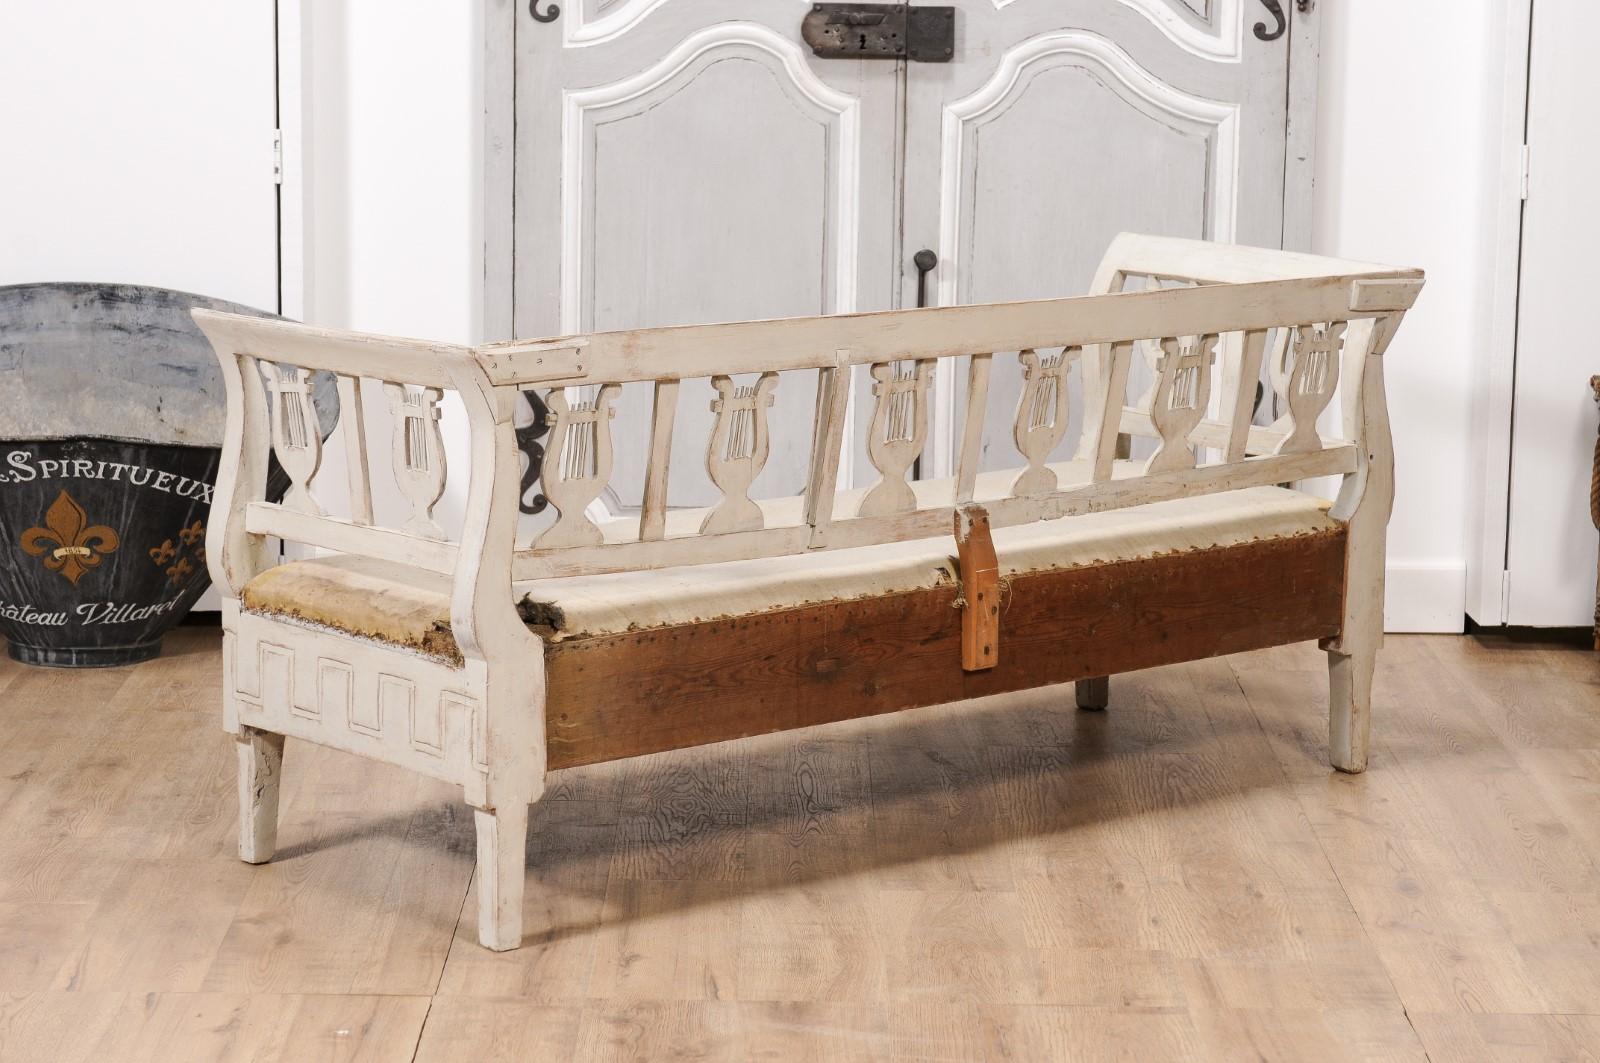 Swedish Karl Johan Period 1820s Painted Sofa with Carved Lyres For Sale 2